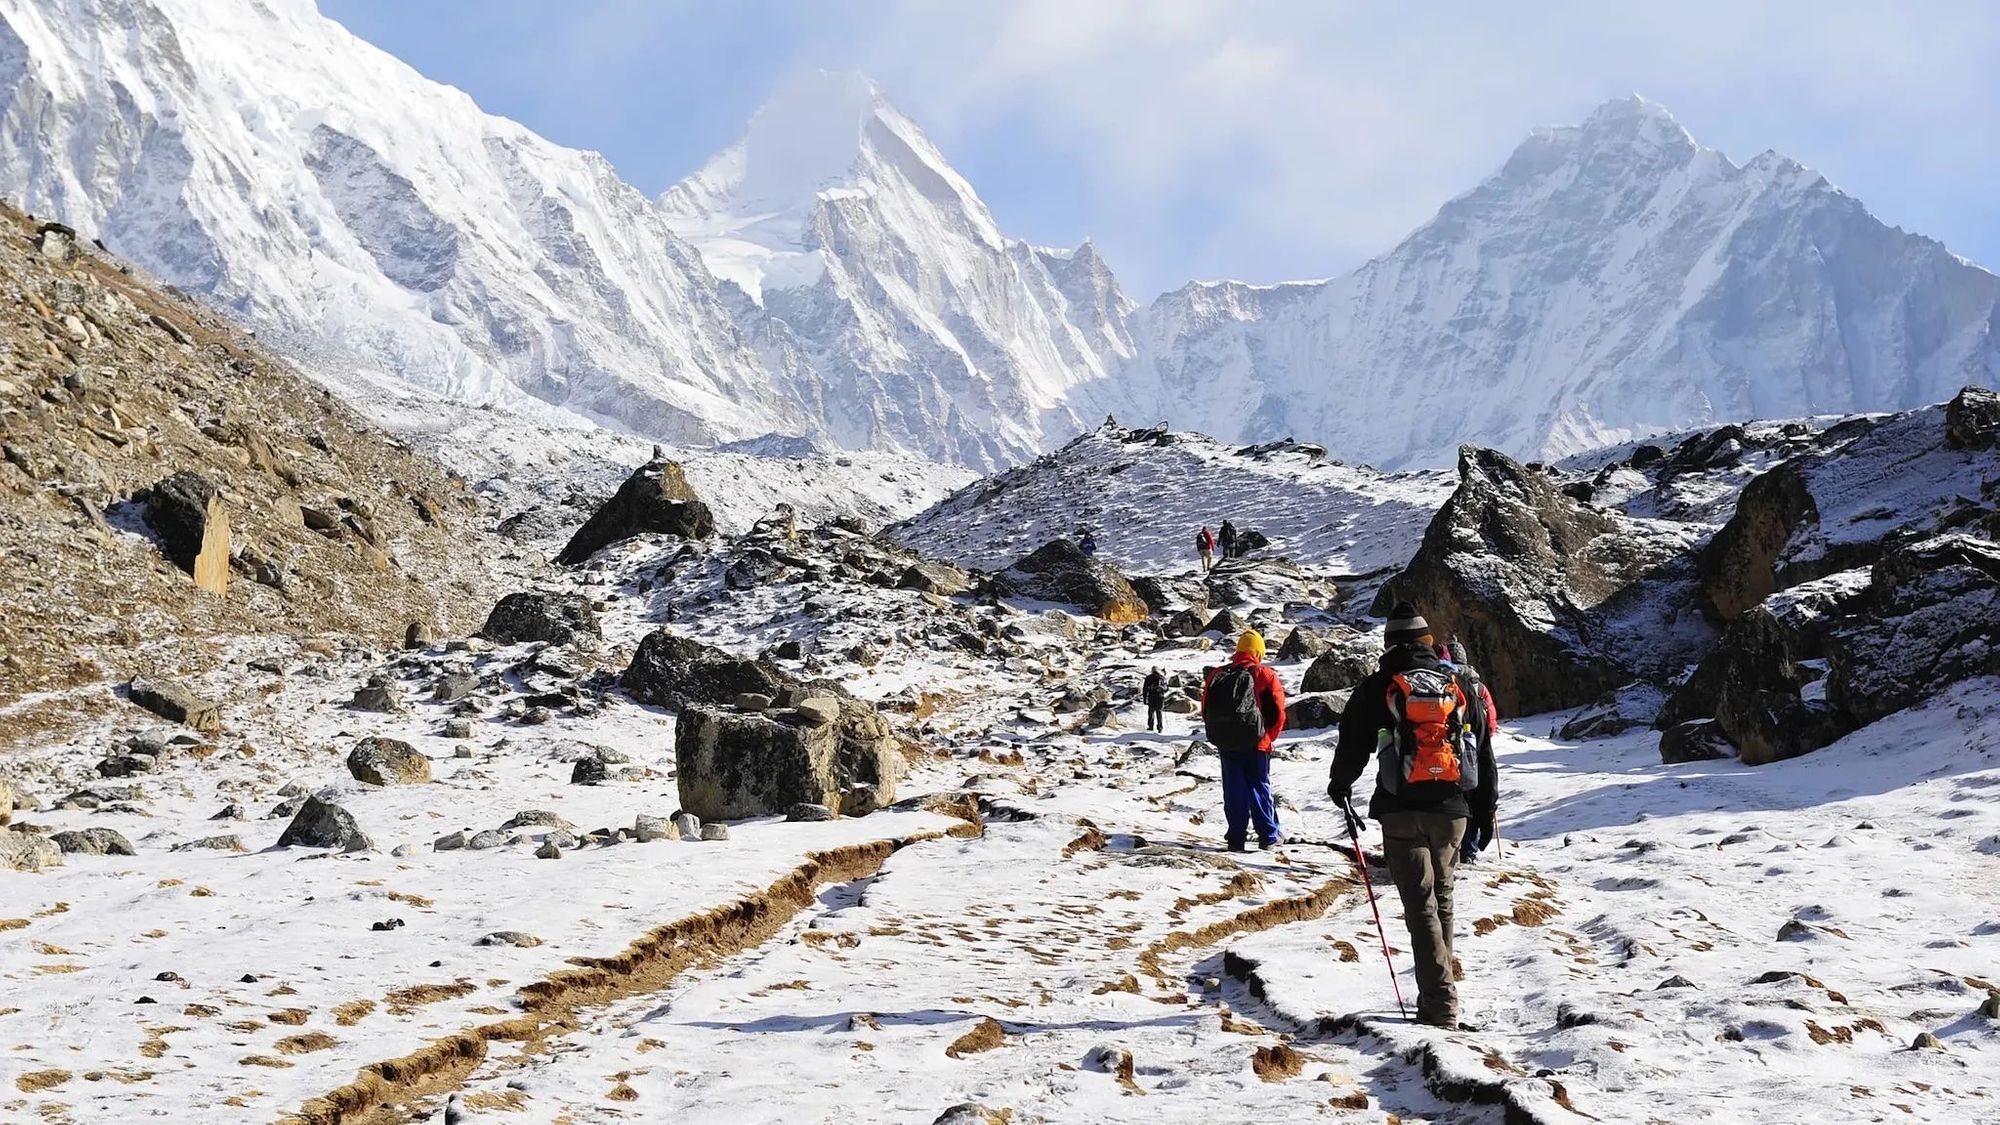 Hikers in the snow on the way to Everest Base Camp.